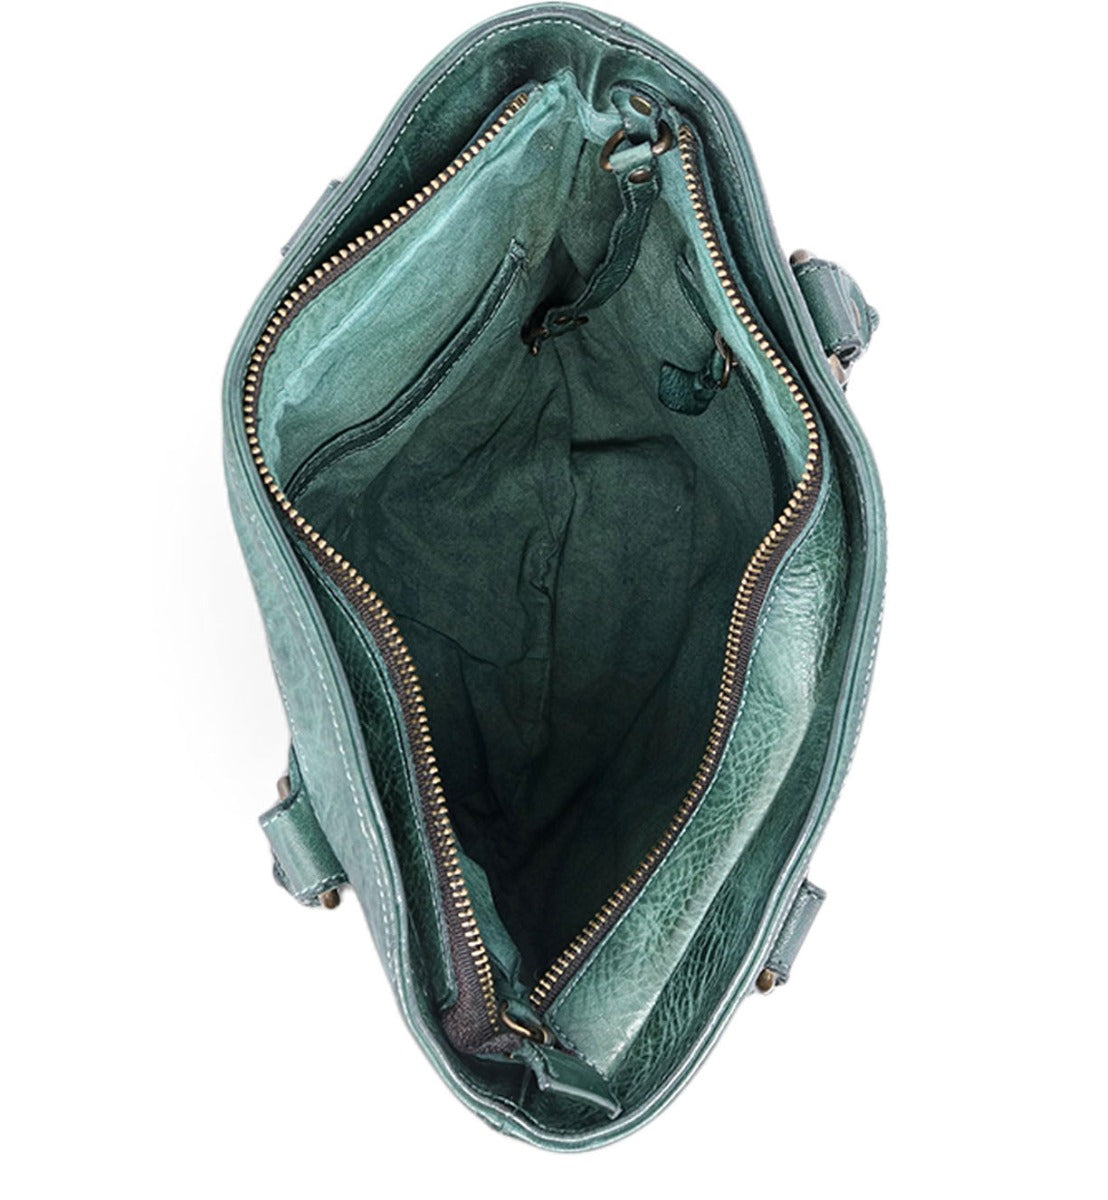 The inside of a Gala green leather bag with zippers. (Brand: Bed Stu)